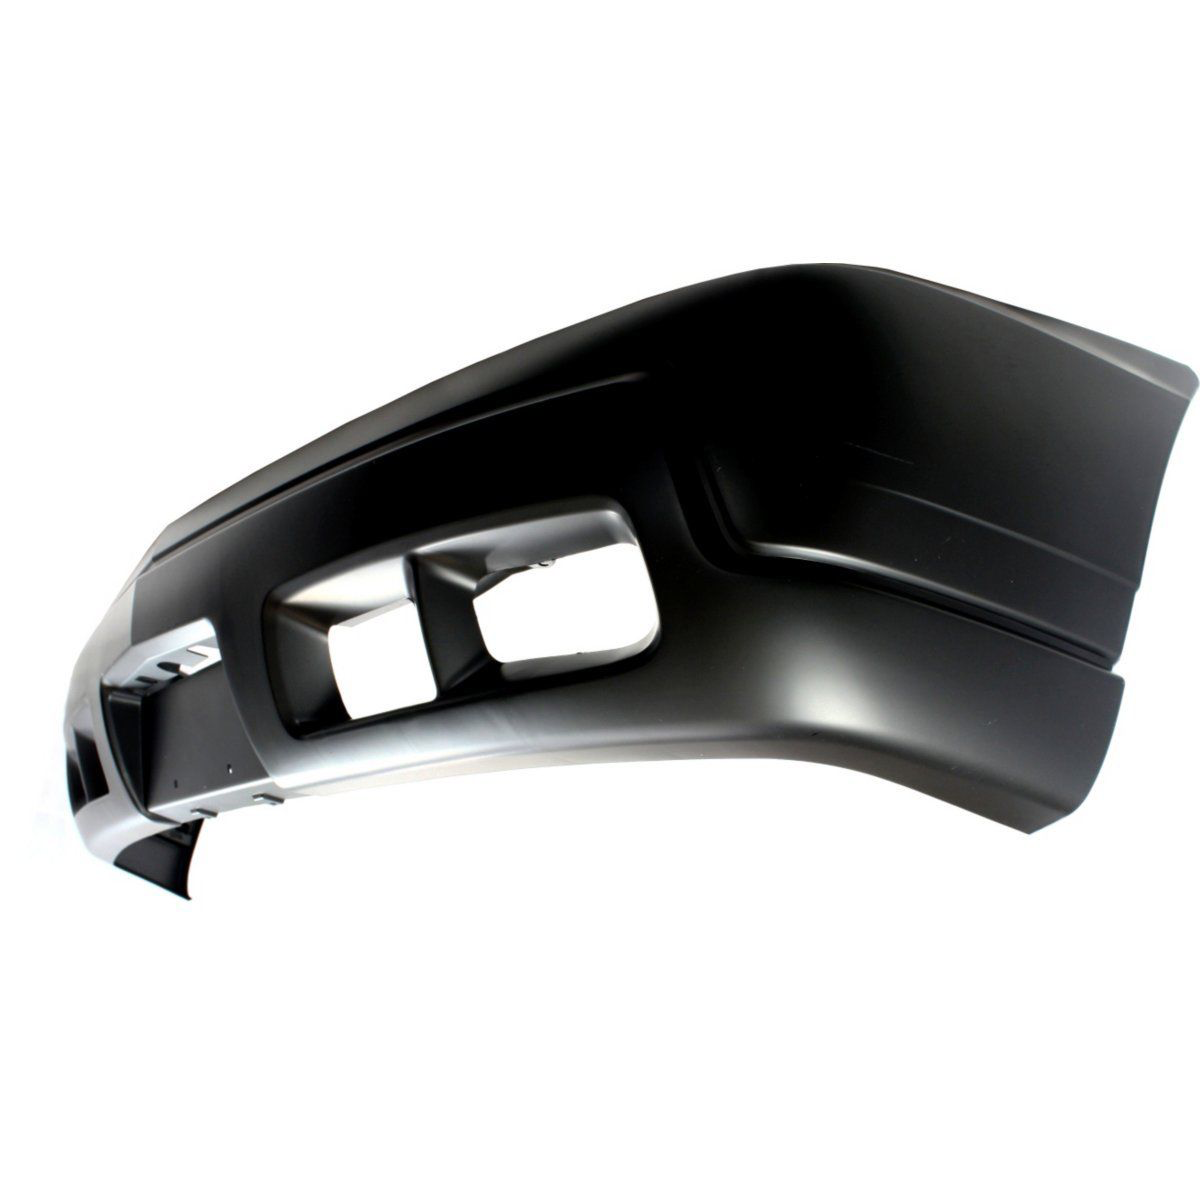 2002-2006 CADILLAC ESCALADE Front Bumper Cover Painted to Match